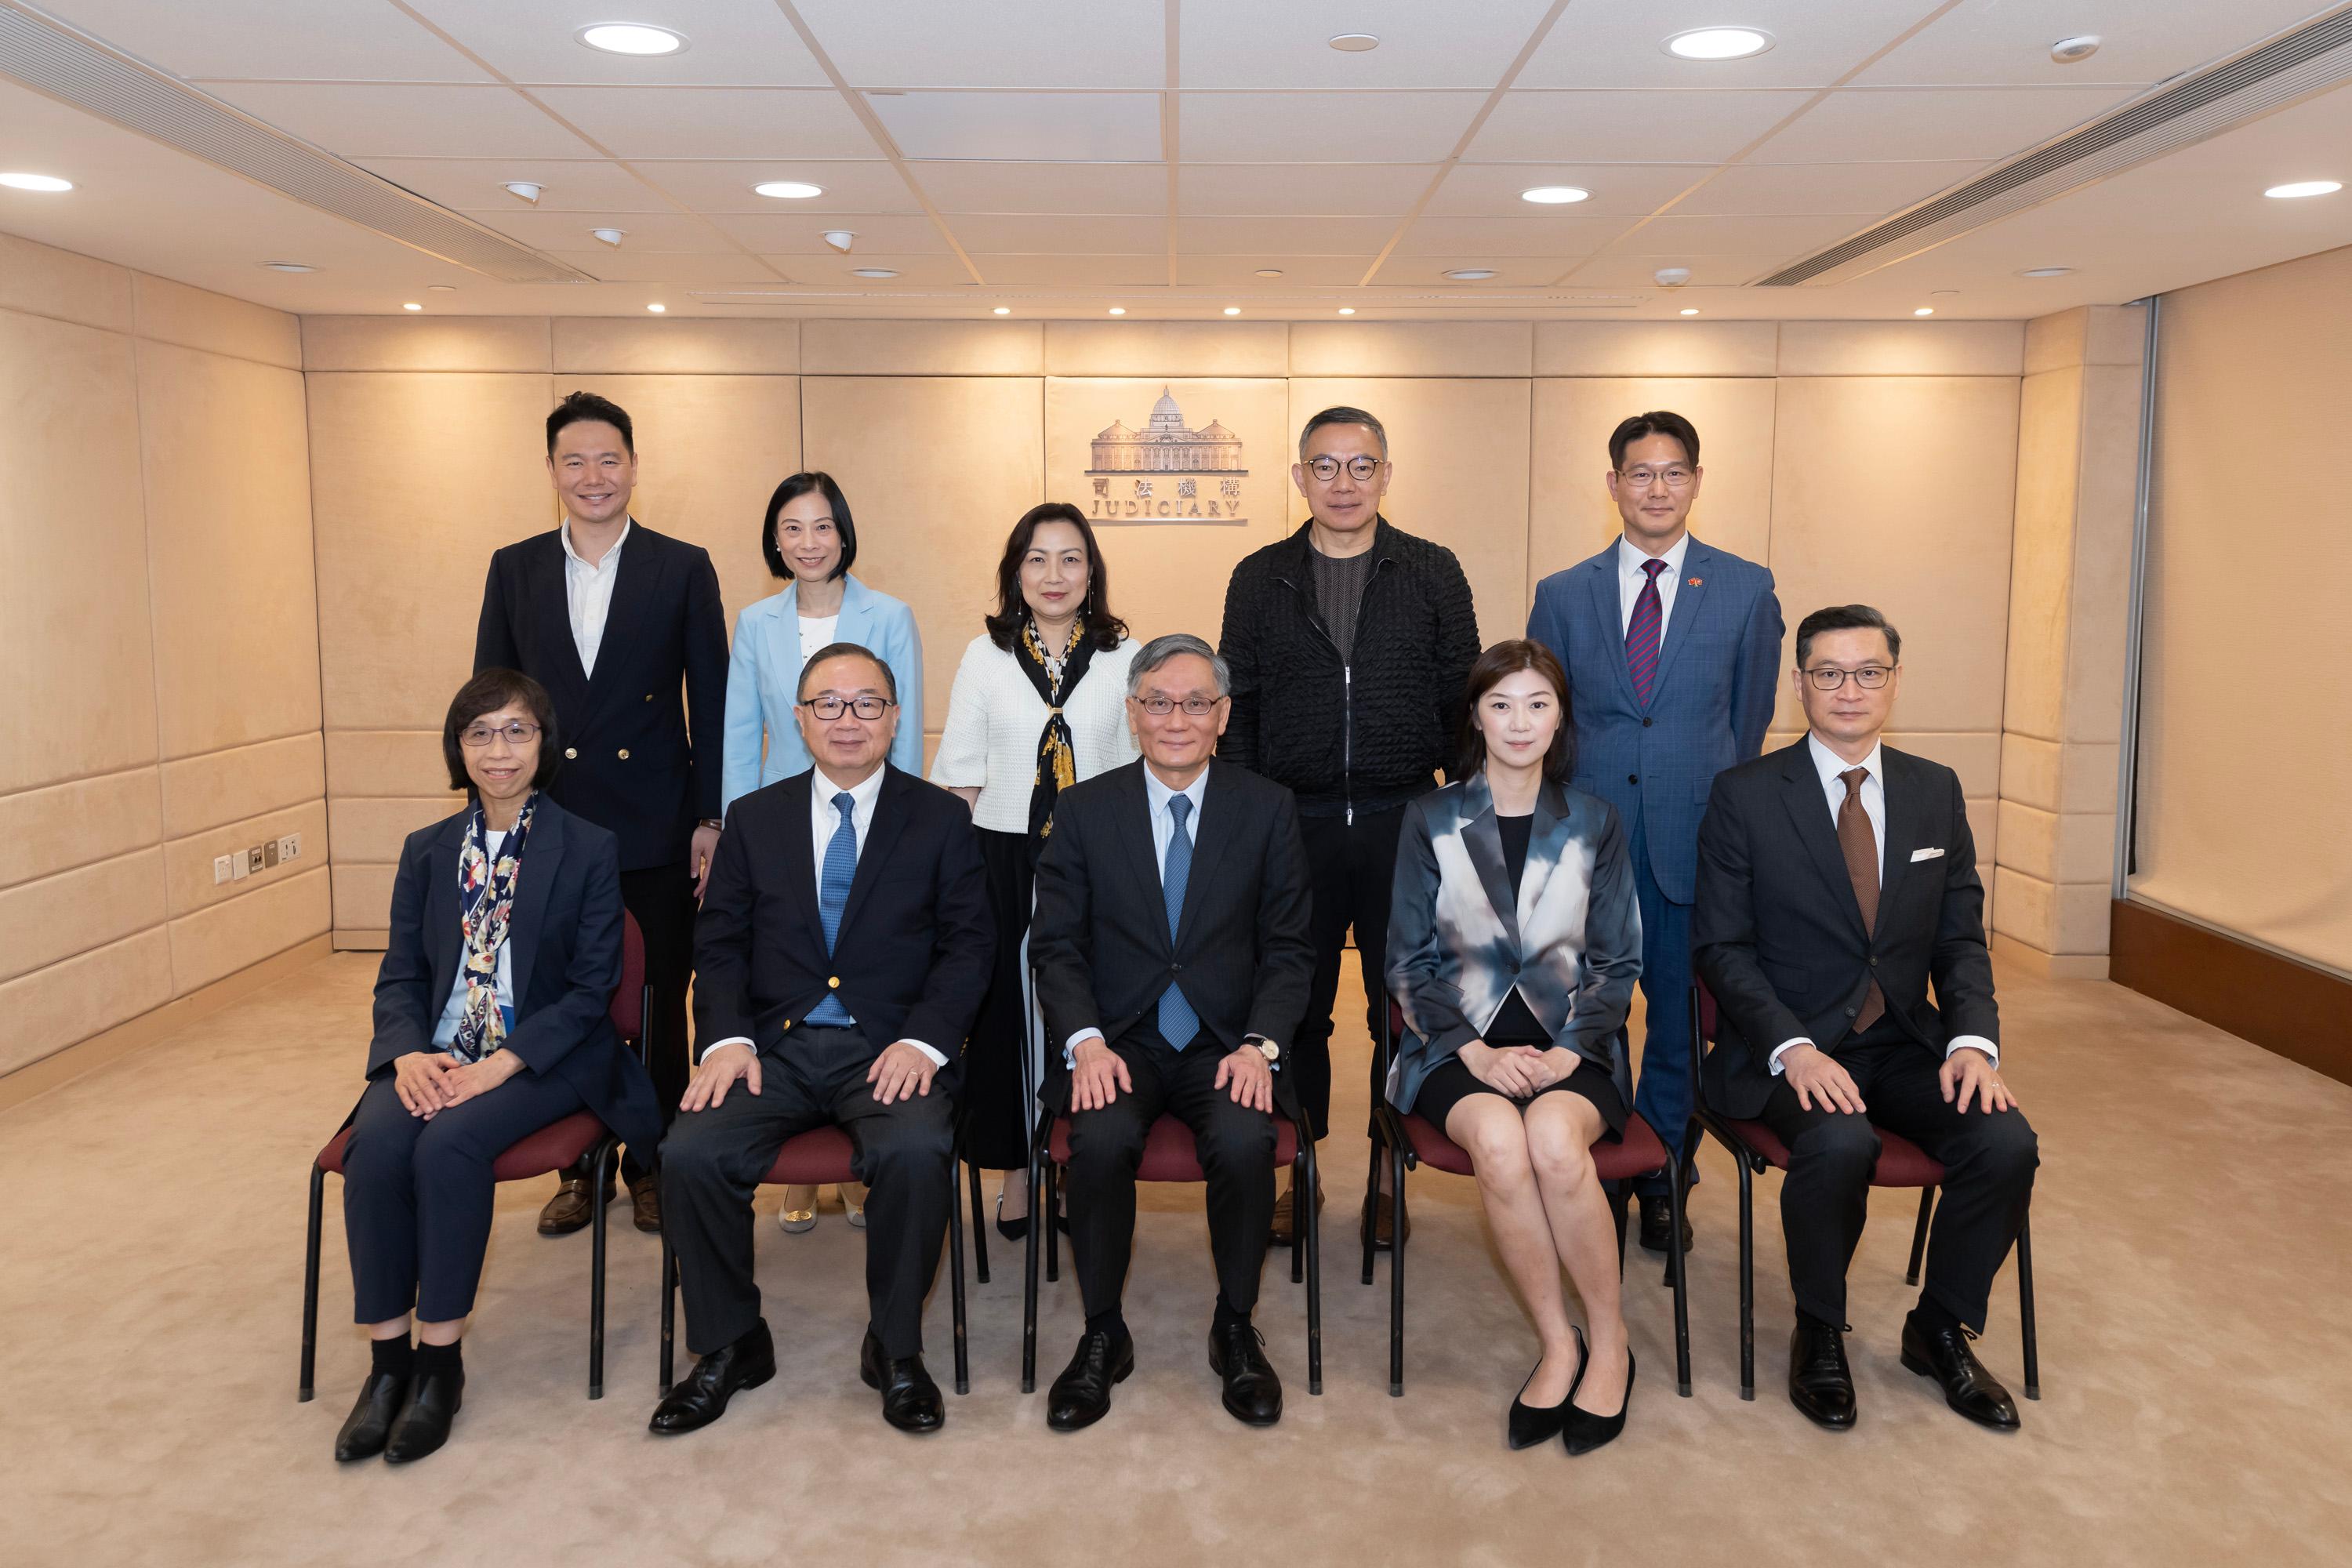 The Legislative Council (LegCo) Panel on Administration of Justice and Legal Services visits the Judiciary at the High Court Building today (June 2) to meet with members of the Judiciary and toured its facilities. Photo shows LegCo Members posing for a group photo with the Chief Justice of the Court of Final Appeal, Mr Andrew Cheung Kui-nung (front row, centre); the Chief Judge of the High Court, Mr Justice Jeremy Poon Shiu-chor (front row, first right); and the Judiciary Administrator, Ms Esther Leung Yuet-yin (front row, first left).